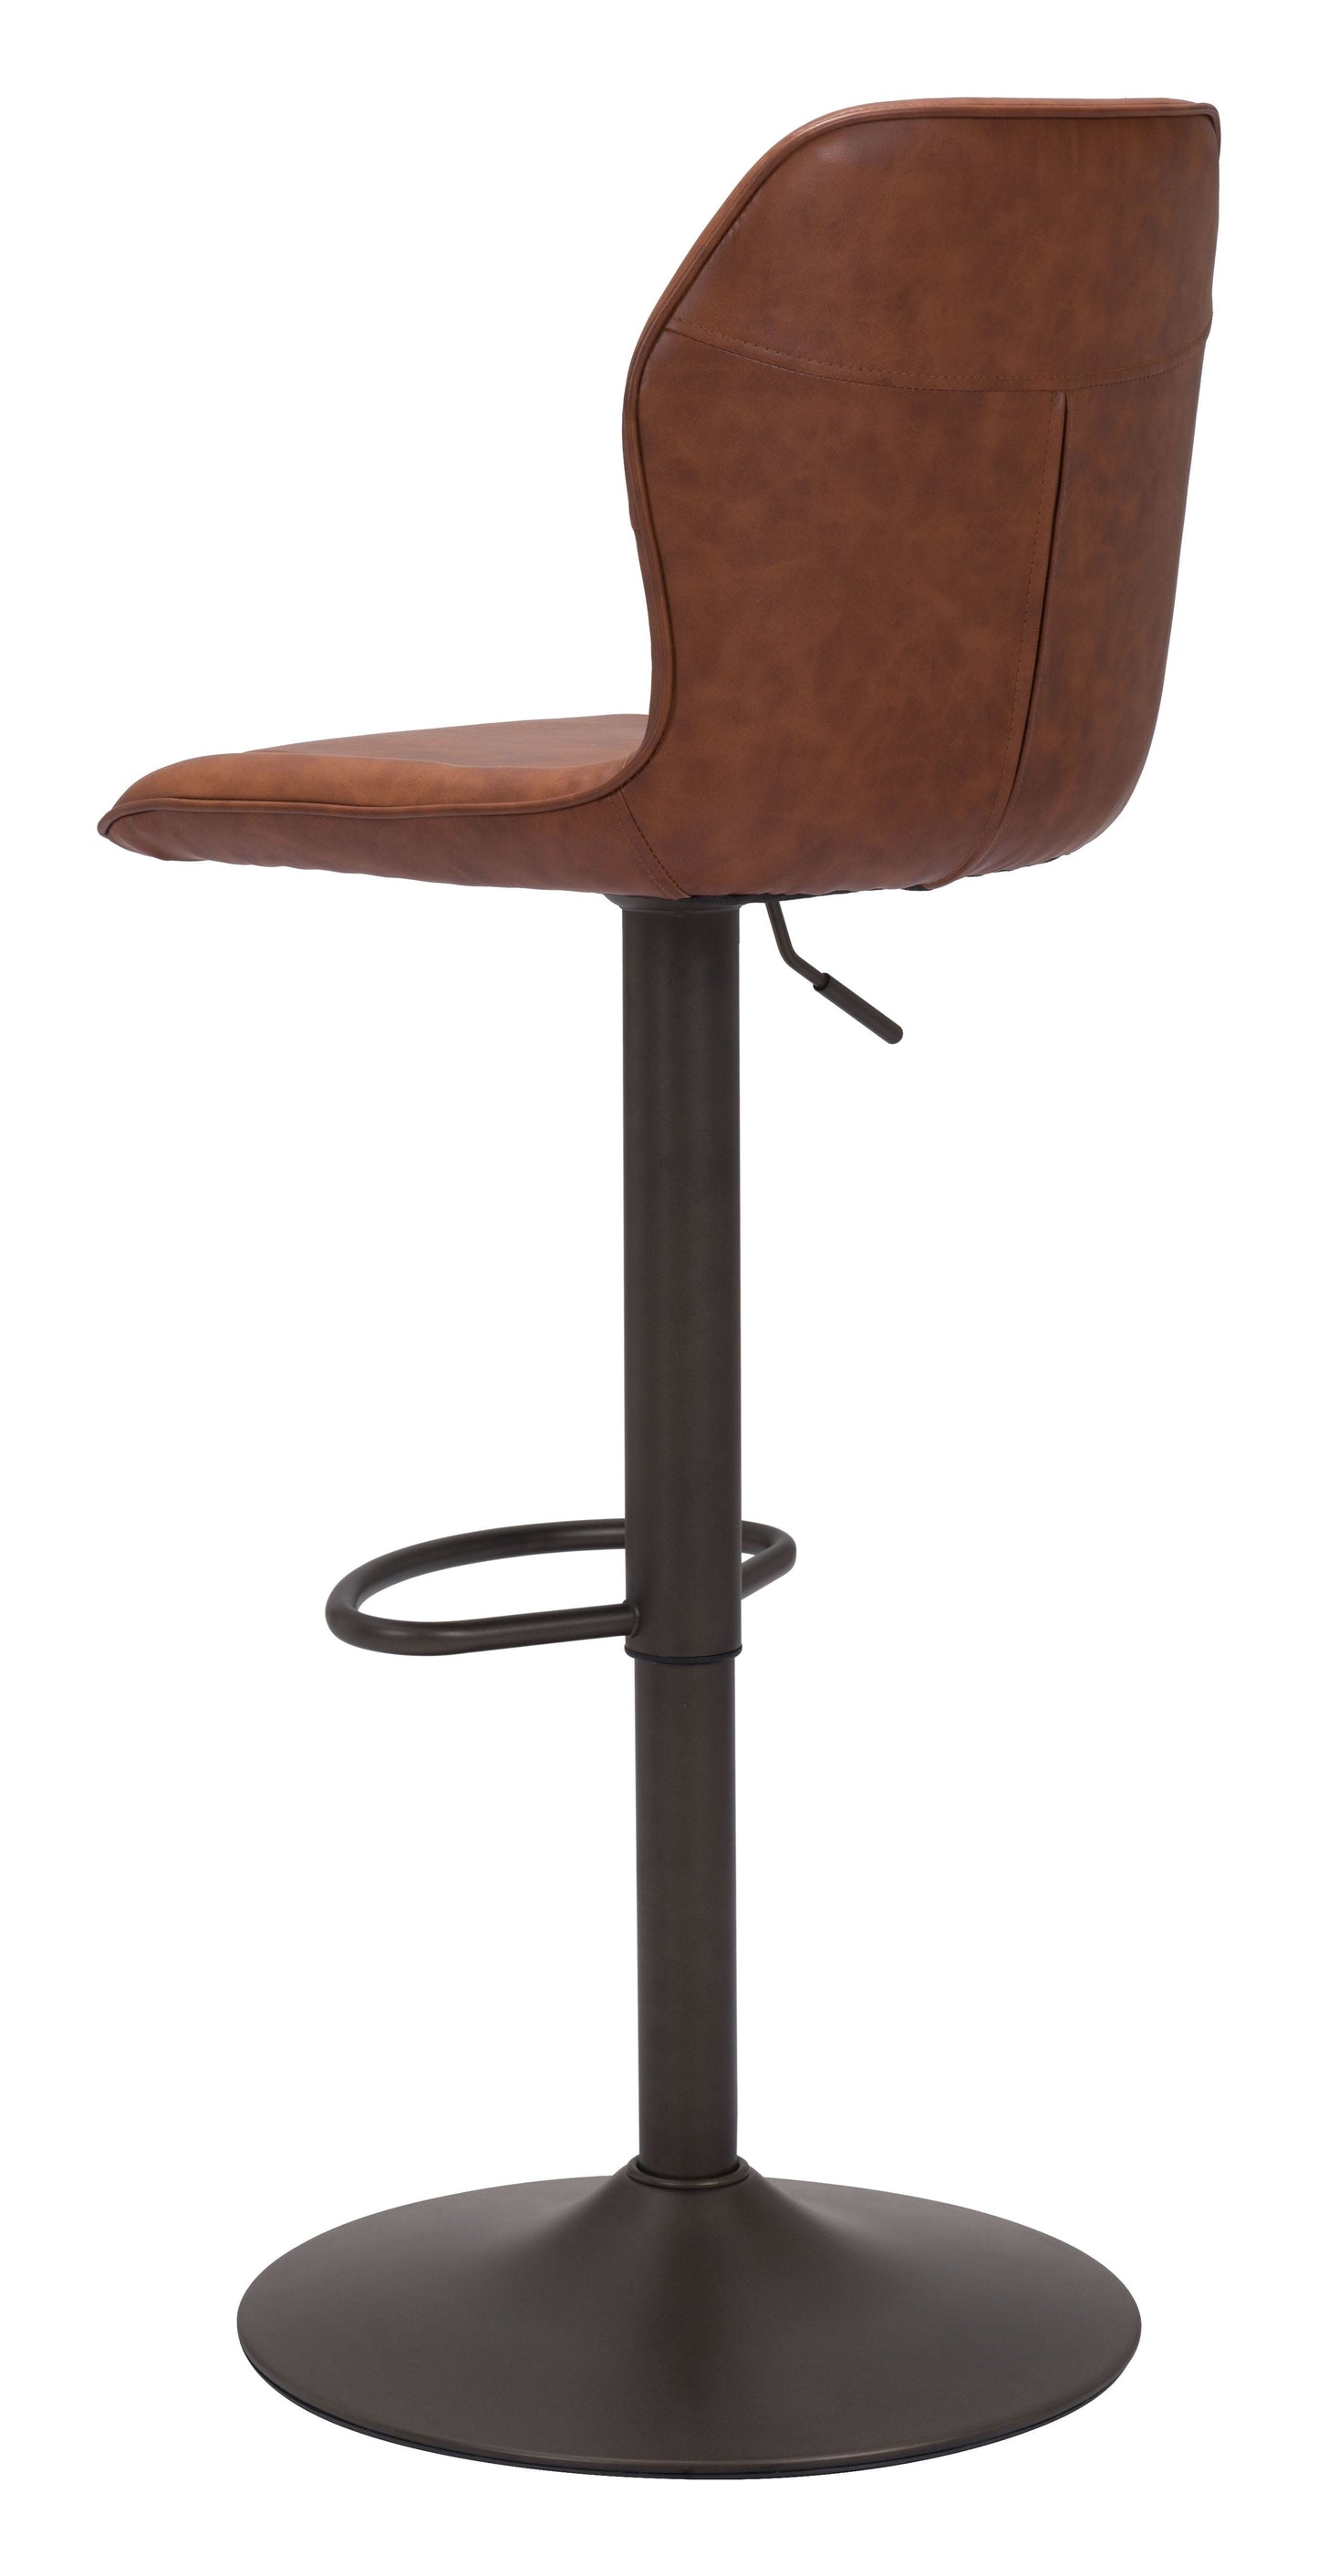 Angled Back View of Commercial Quality Brown Barstool